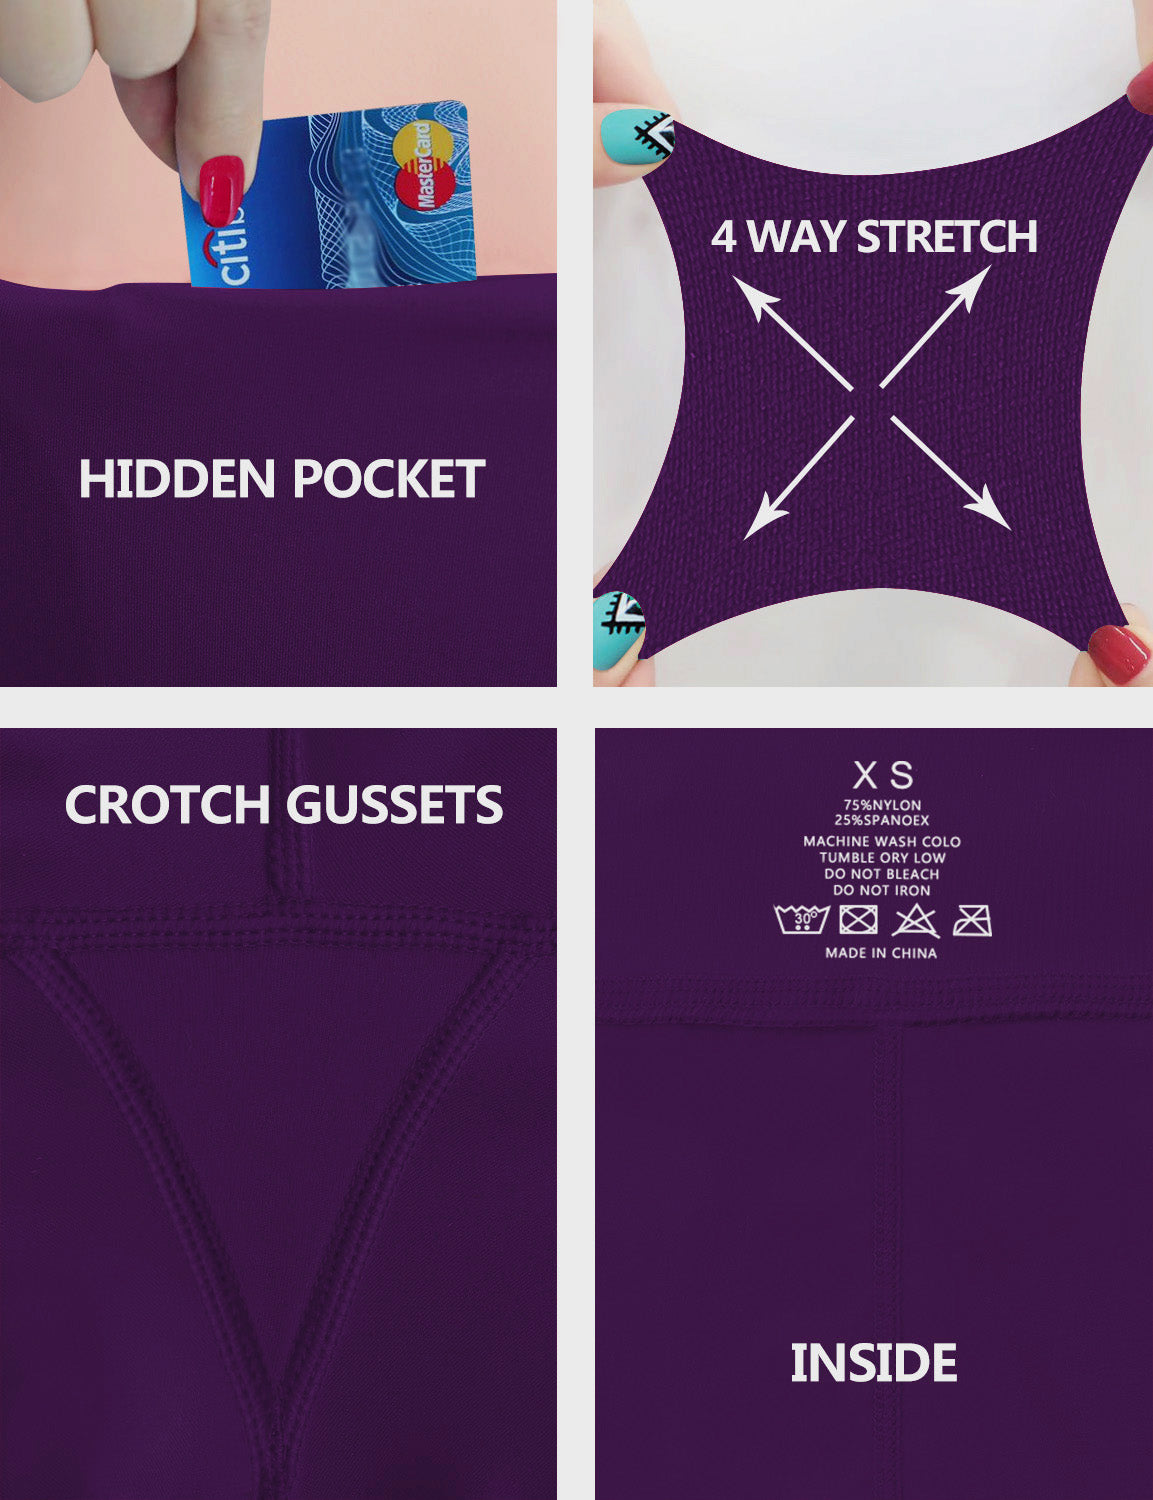 High Waist Side Pockets Plus Size Pants eggplantpurple 75% Nylon, 25% Spandex Fabric doesn't attract lint easily 4-way stretch No see-through Moisture-wicking Tummy control Inner pocket